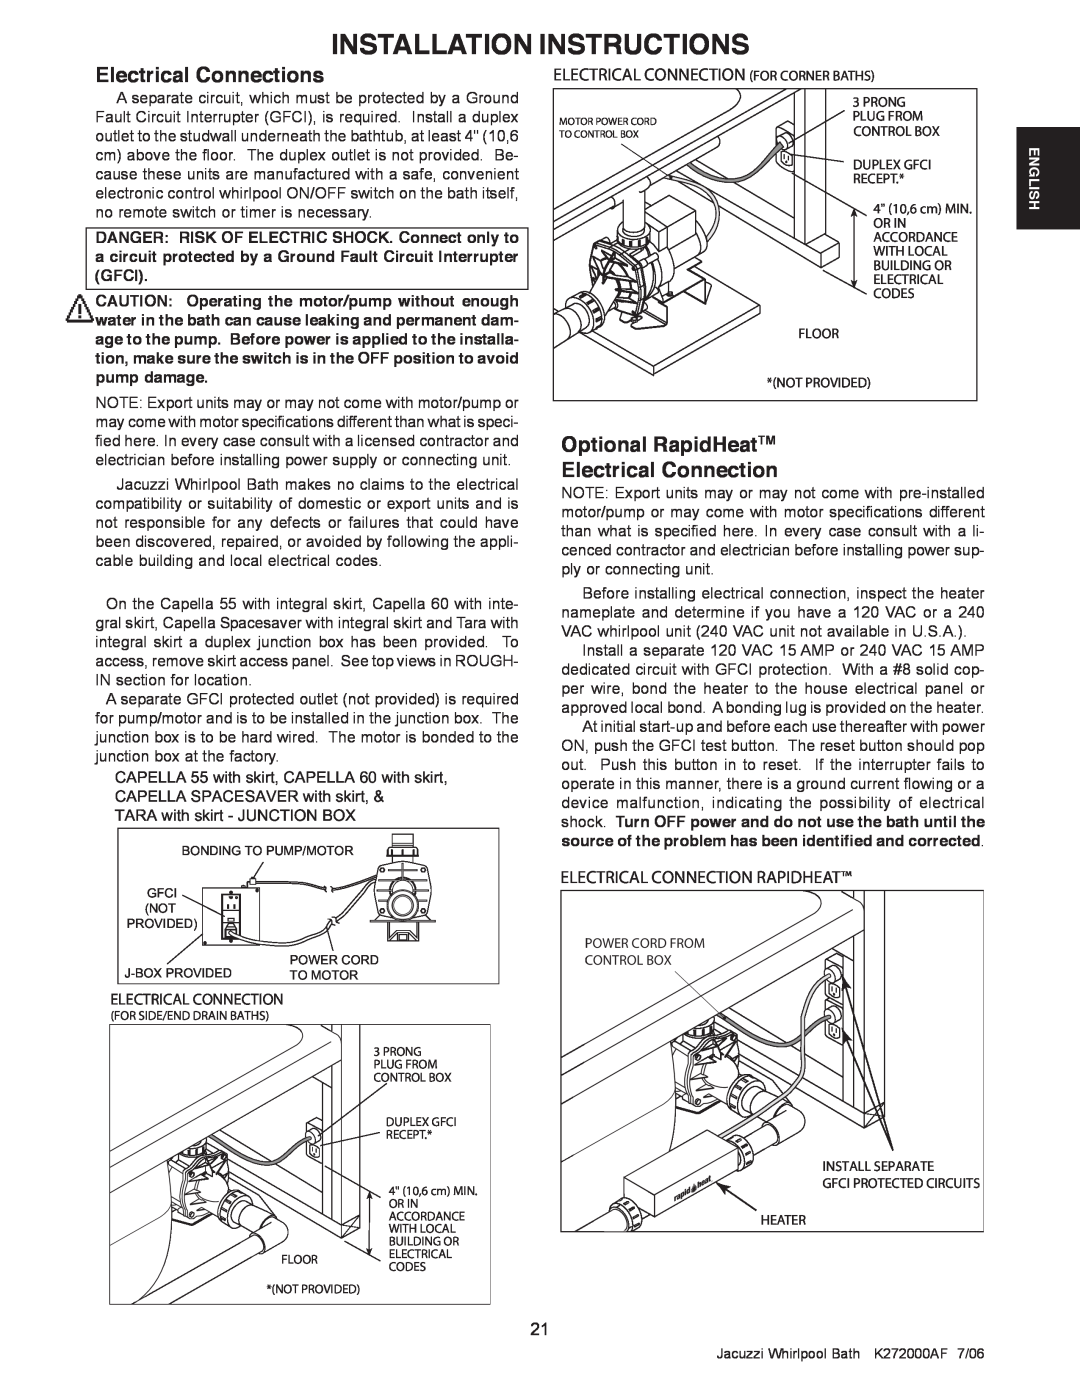 Jacuzzi K272000AF 7/06 manual Electrical Connections, Optional RapidHeatTM Electrical Connection, Installation Instructions 